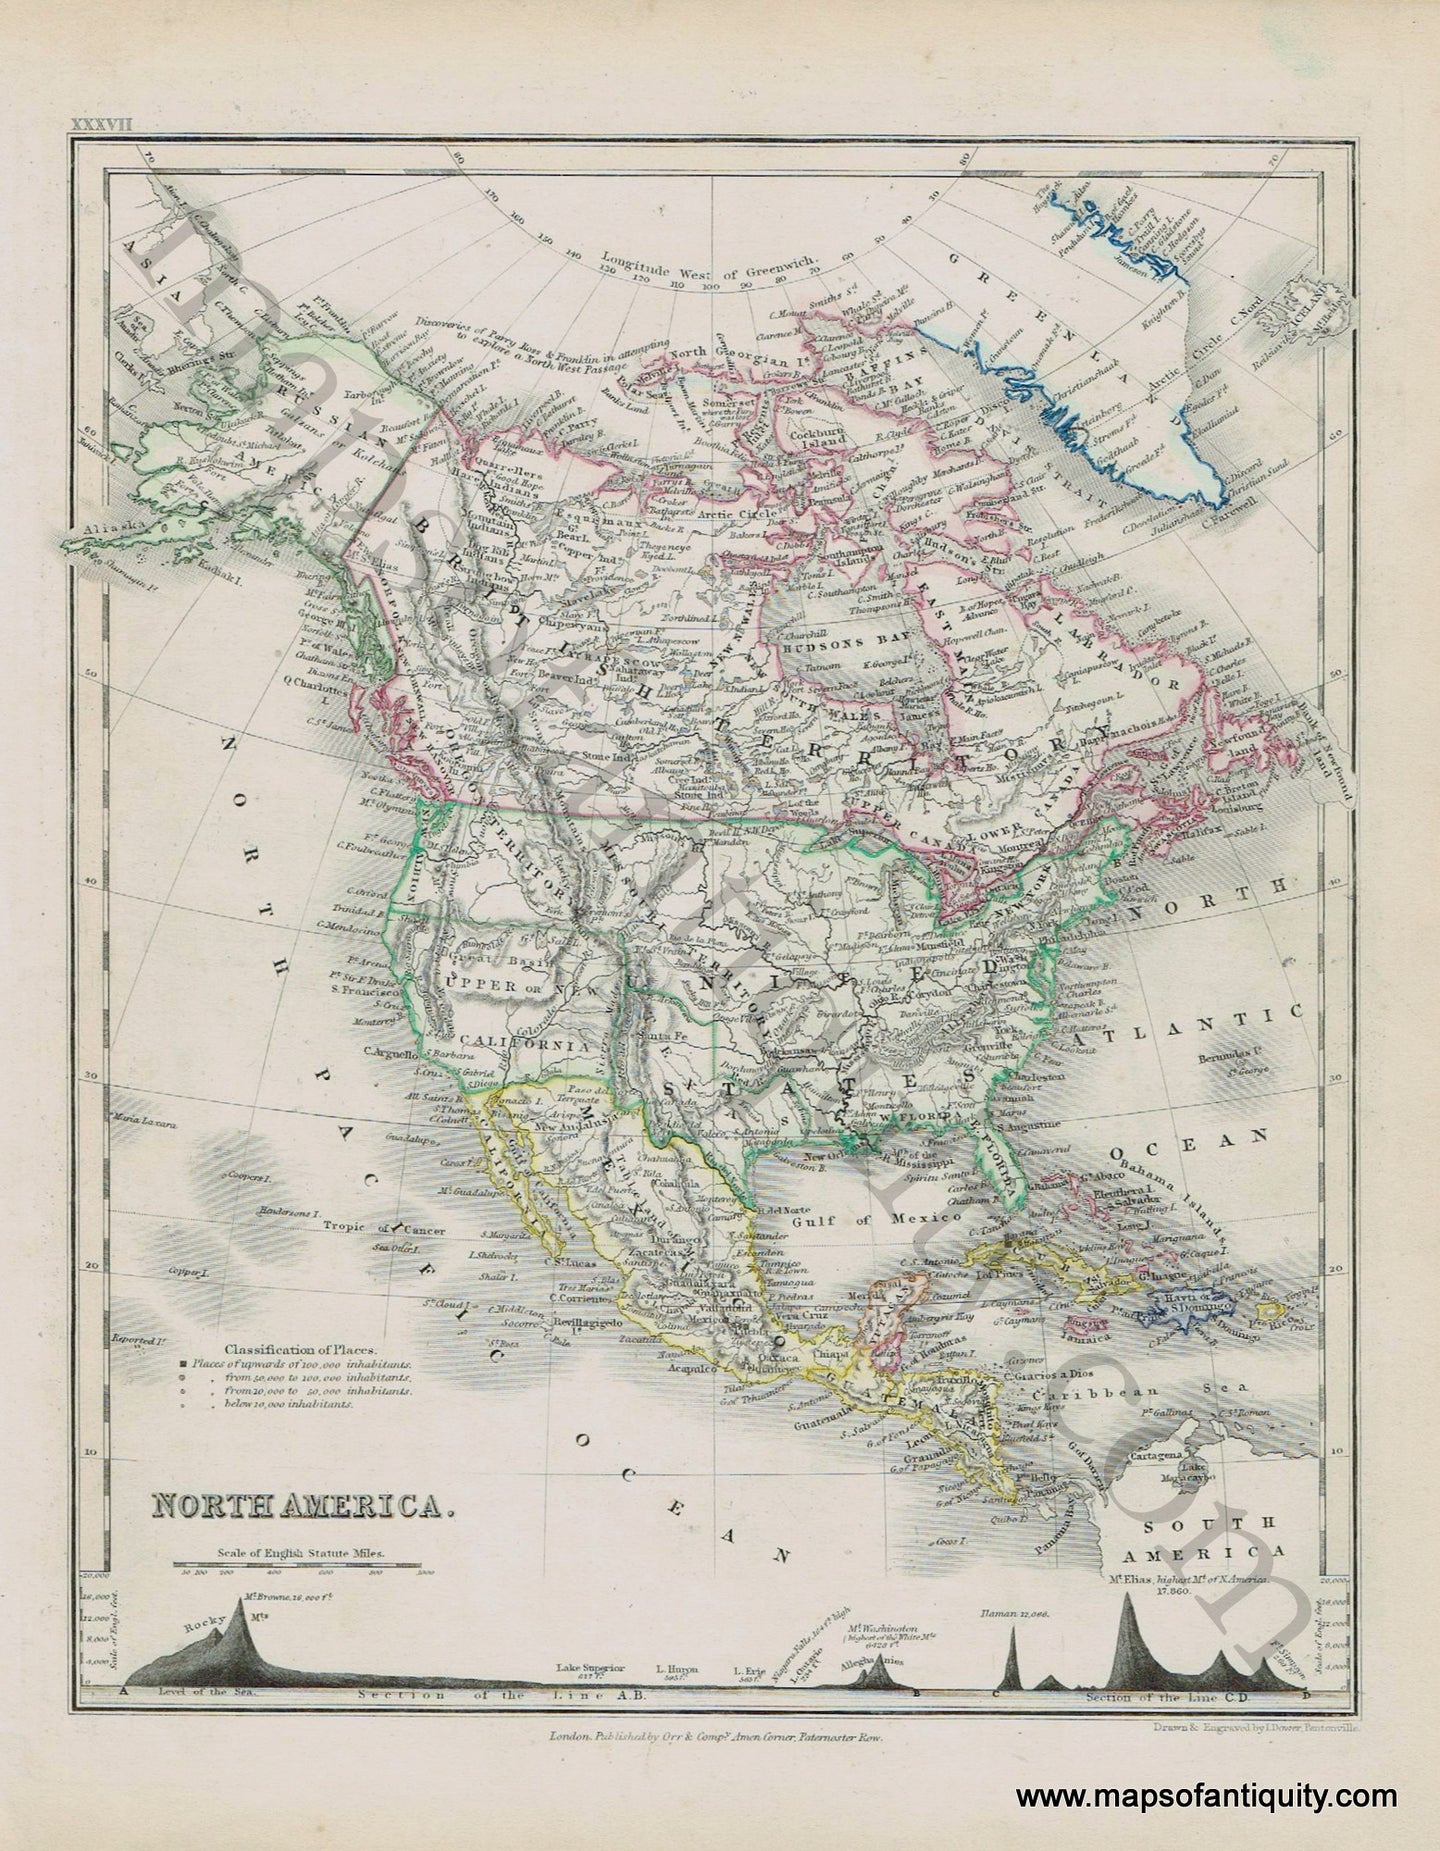 Antique-Map-North-America-Canada-United-States-Mexico-Central-America-California-Texas-Dower-Orr-1849-1840s-1800s-19th-century-Maps-of-Antiquity